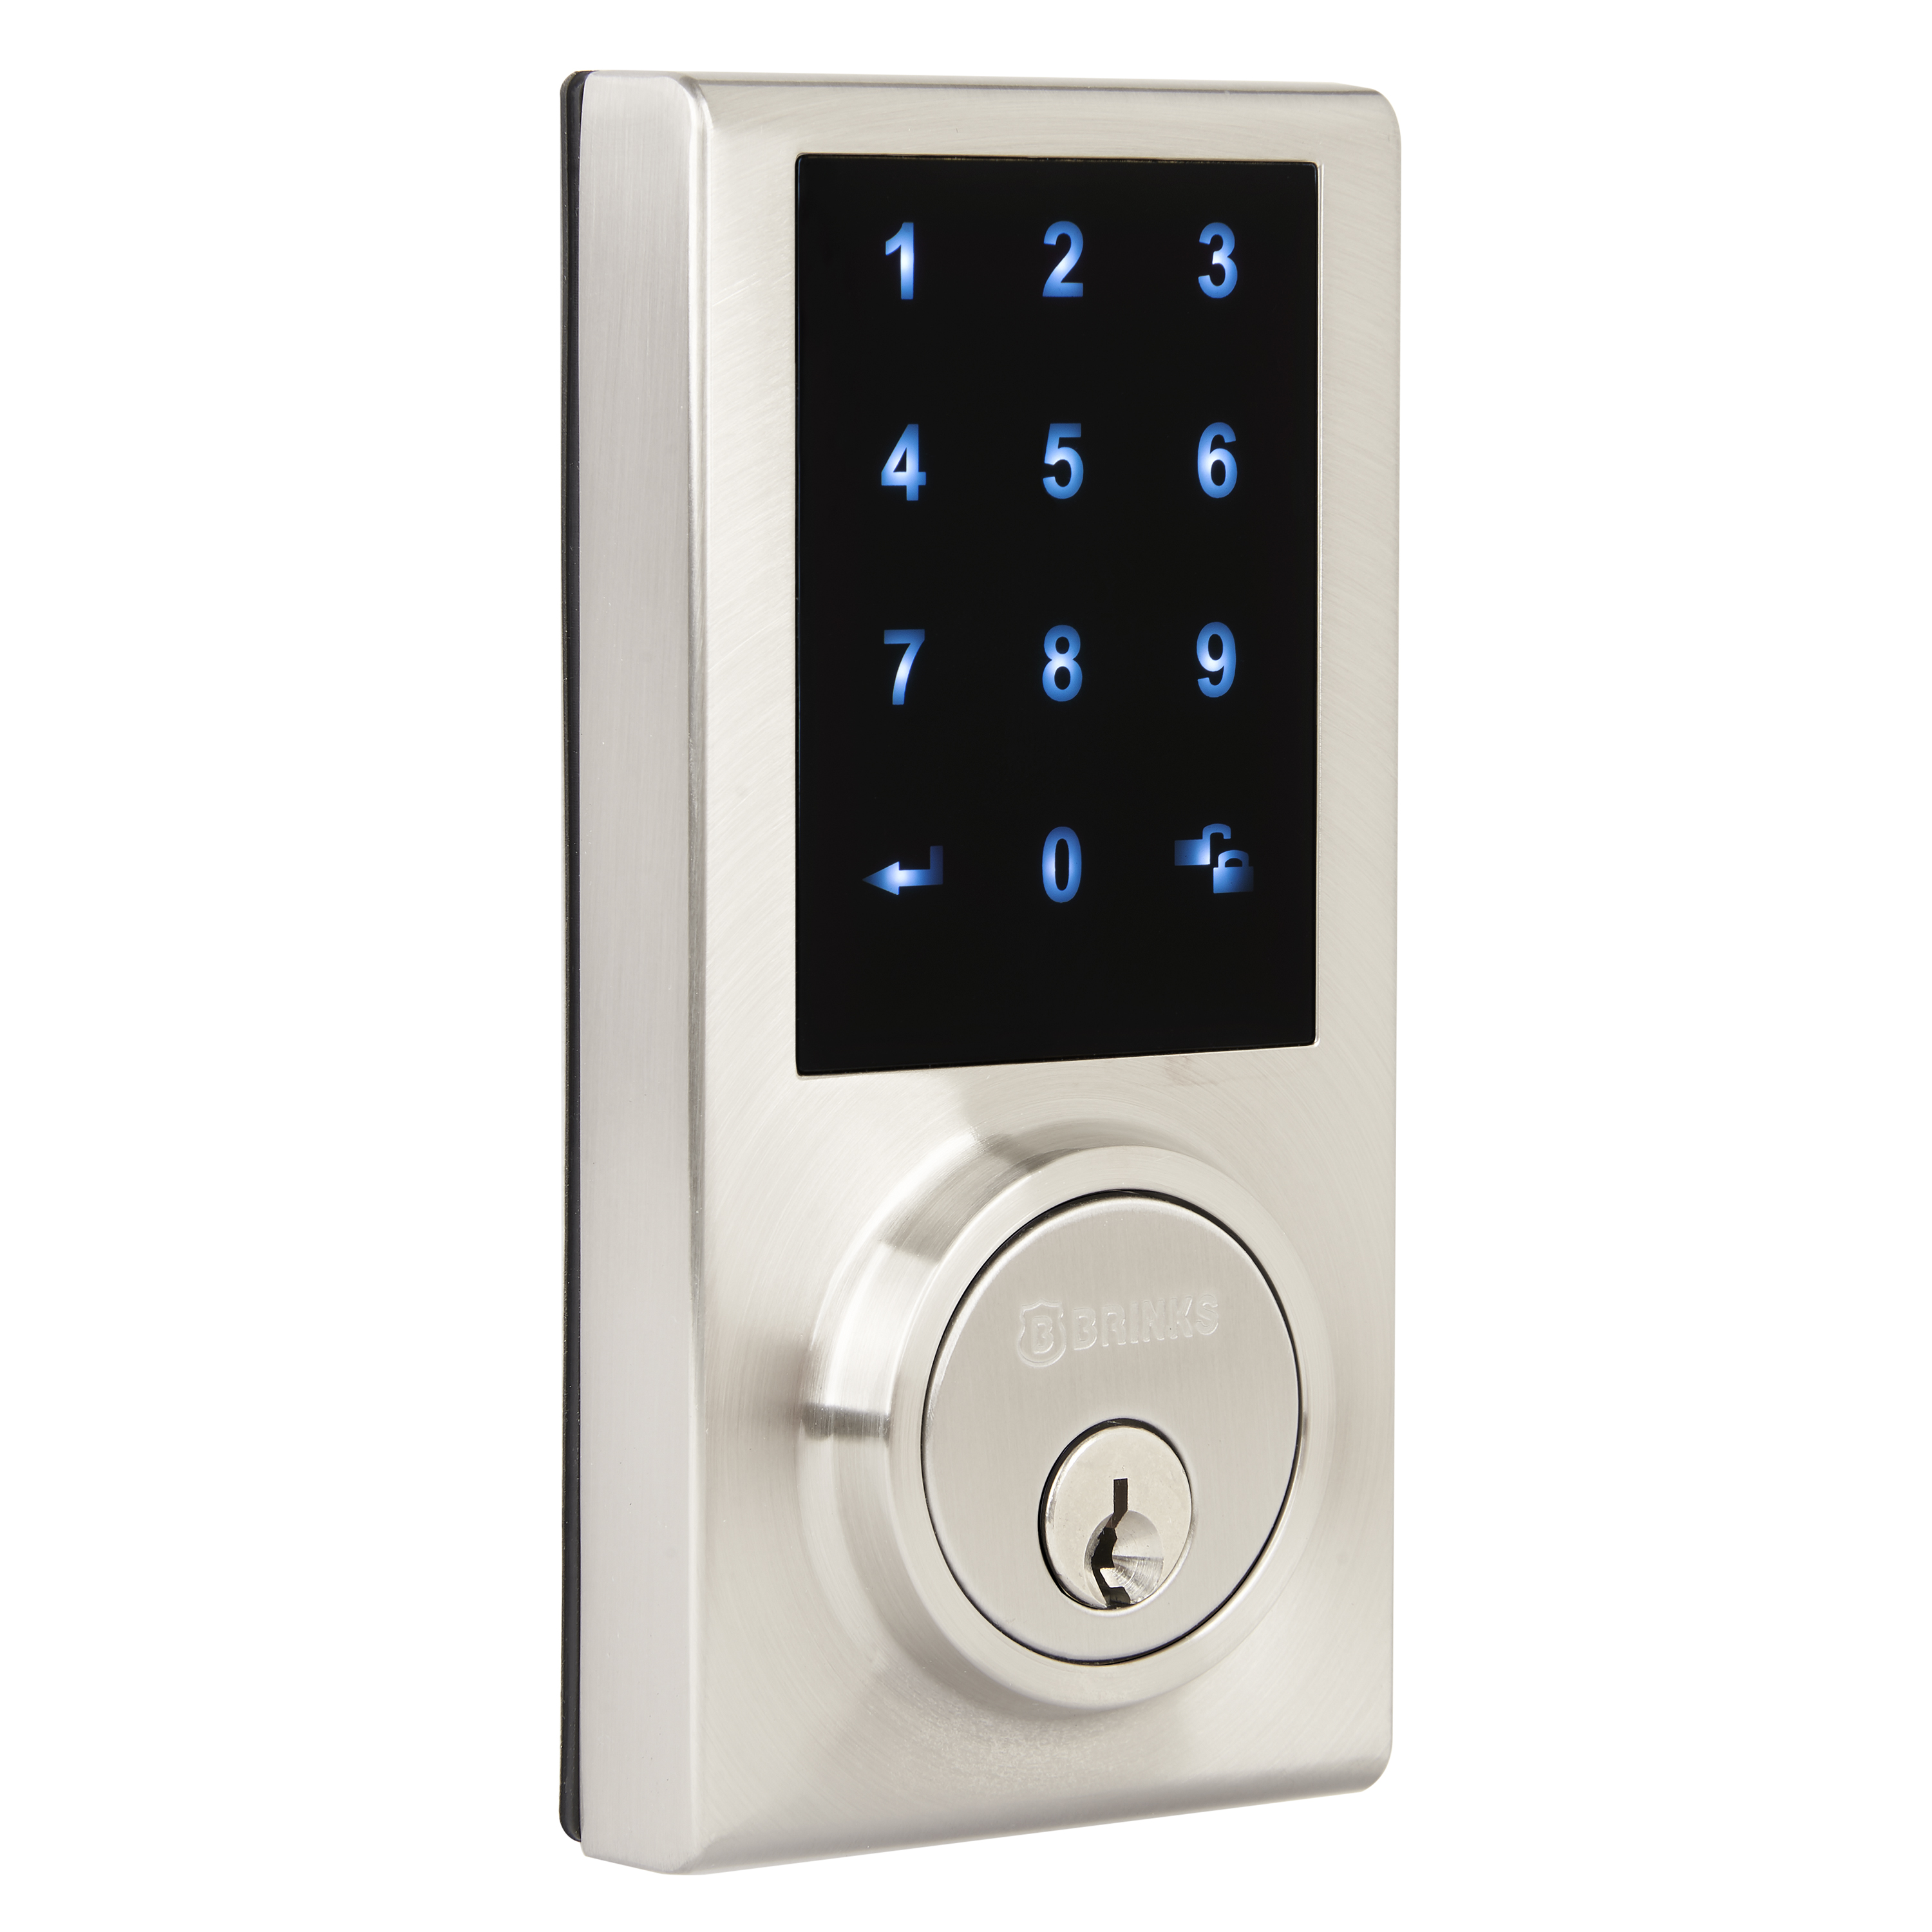 Brinks, Keyed Entry Satin Nickel Electronic Touchscreen Deadbolt - image 3 of 16